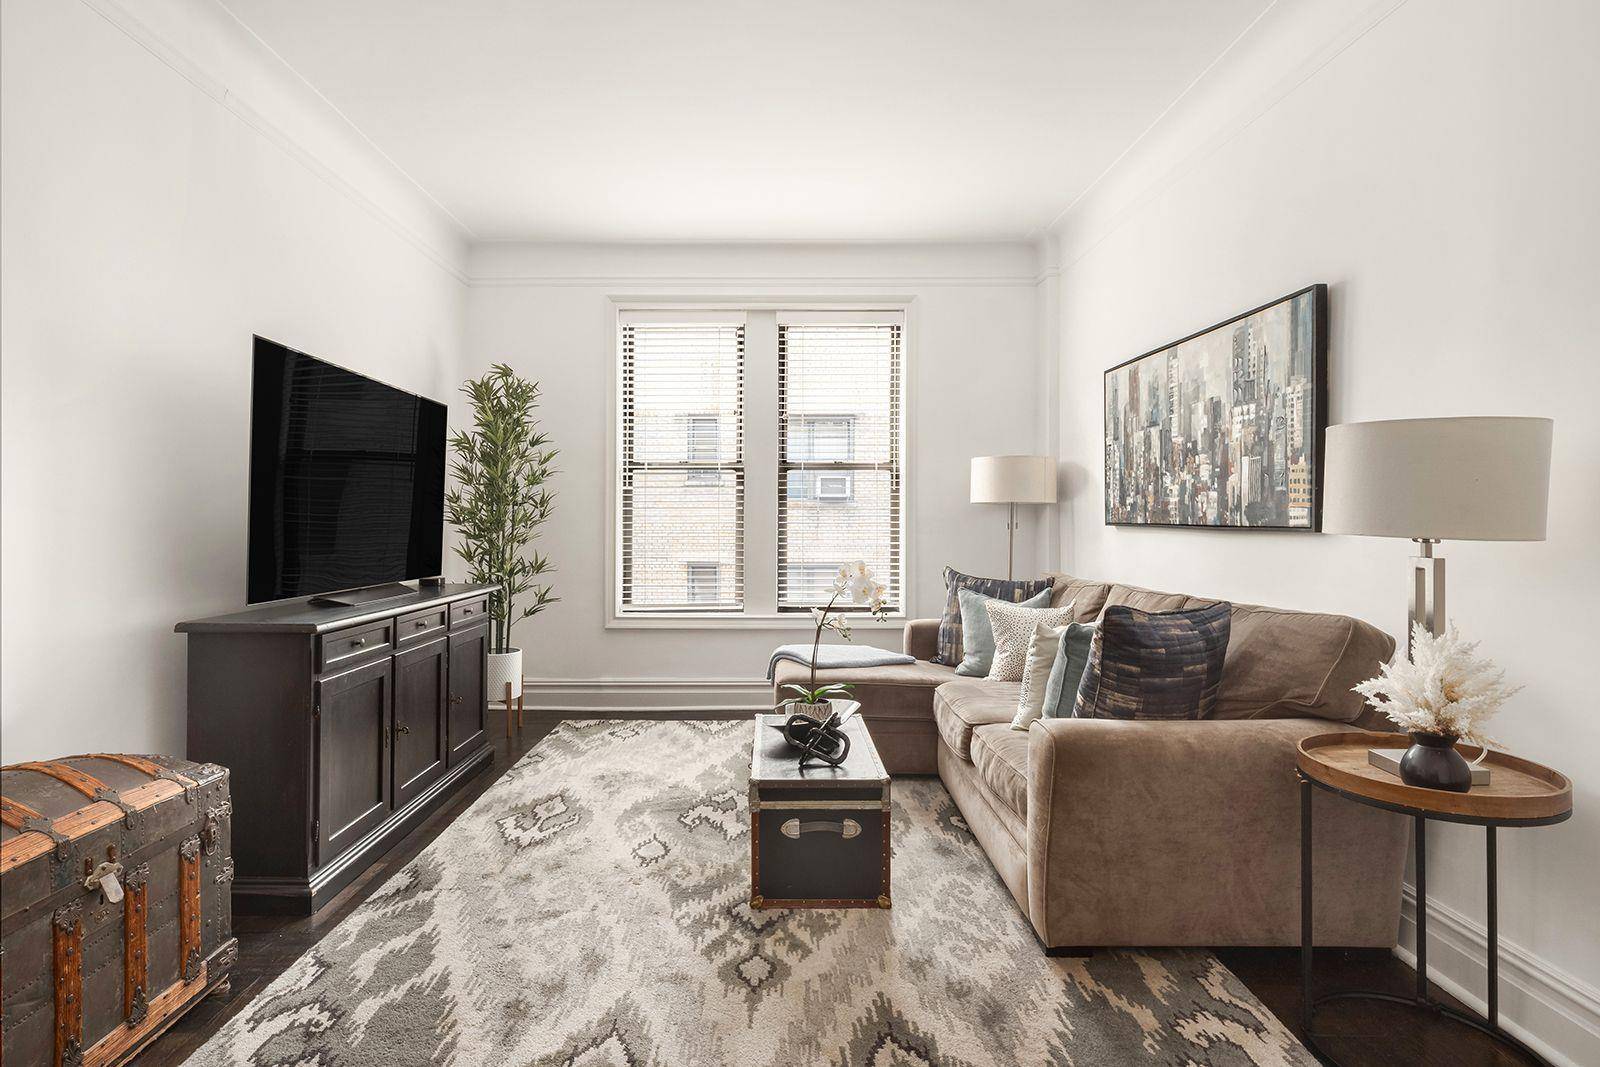 This high floor, spacious, quiet amp ; bright all day fully renovated 1 bedroom 1 bathroom home resides at 240 West 75th Street, a well established circa 1920 prewar cooperative ...